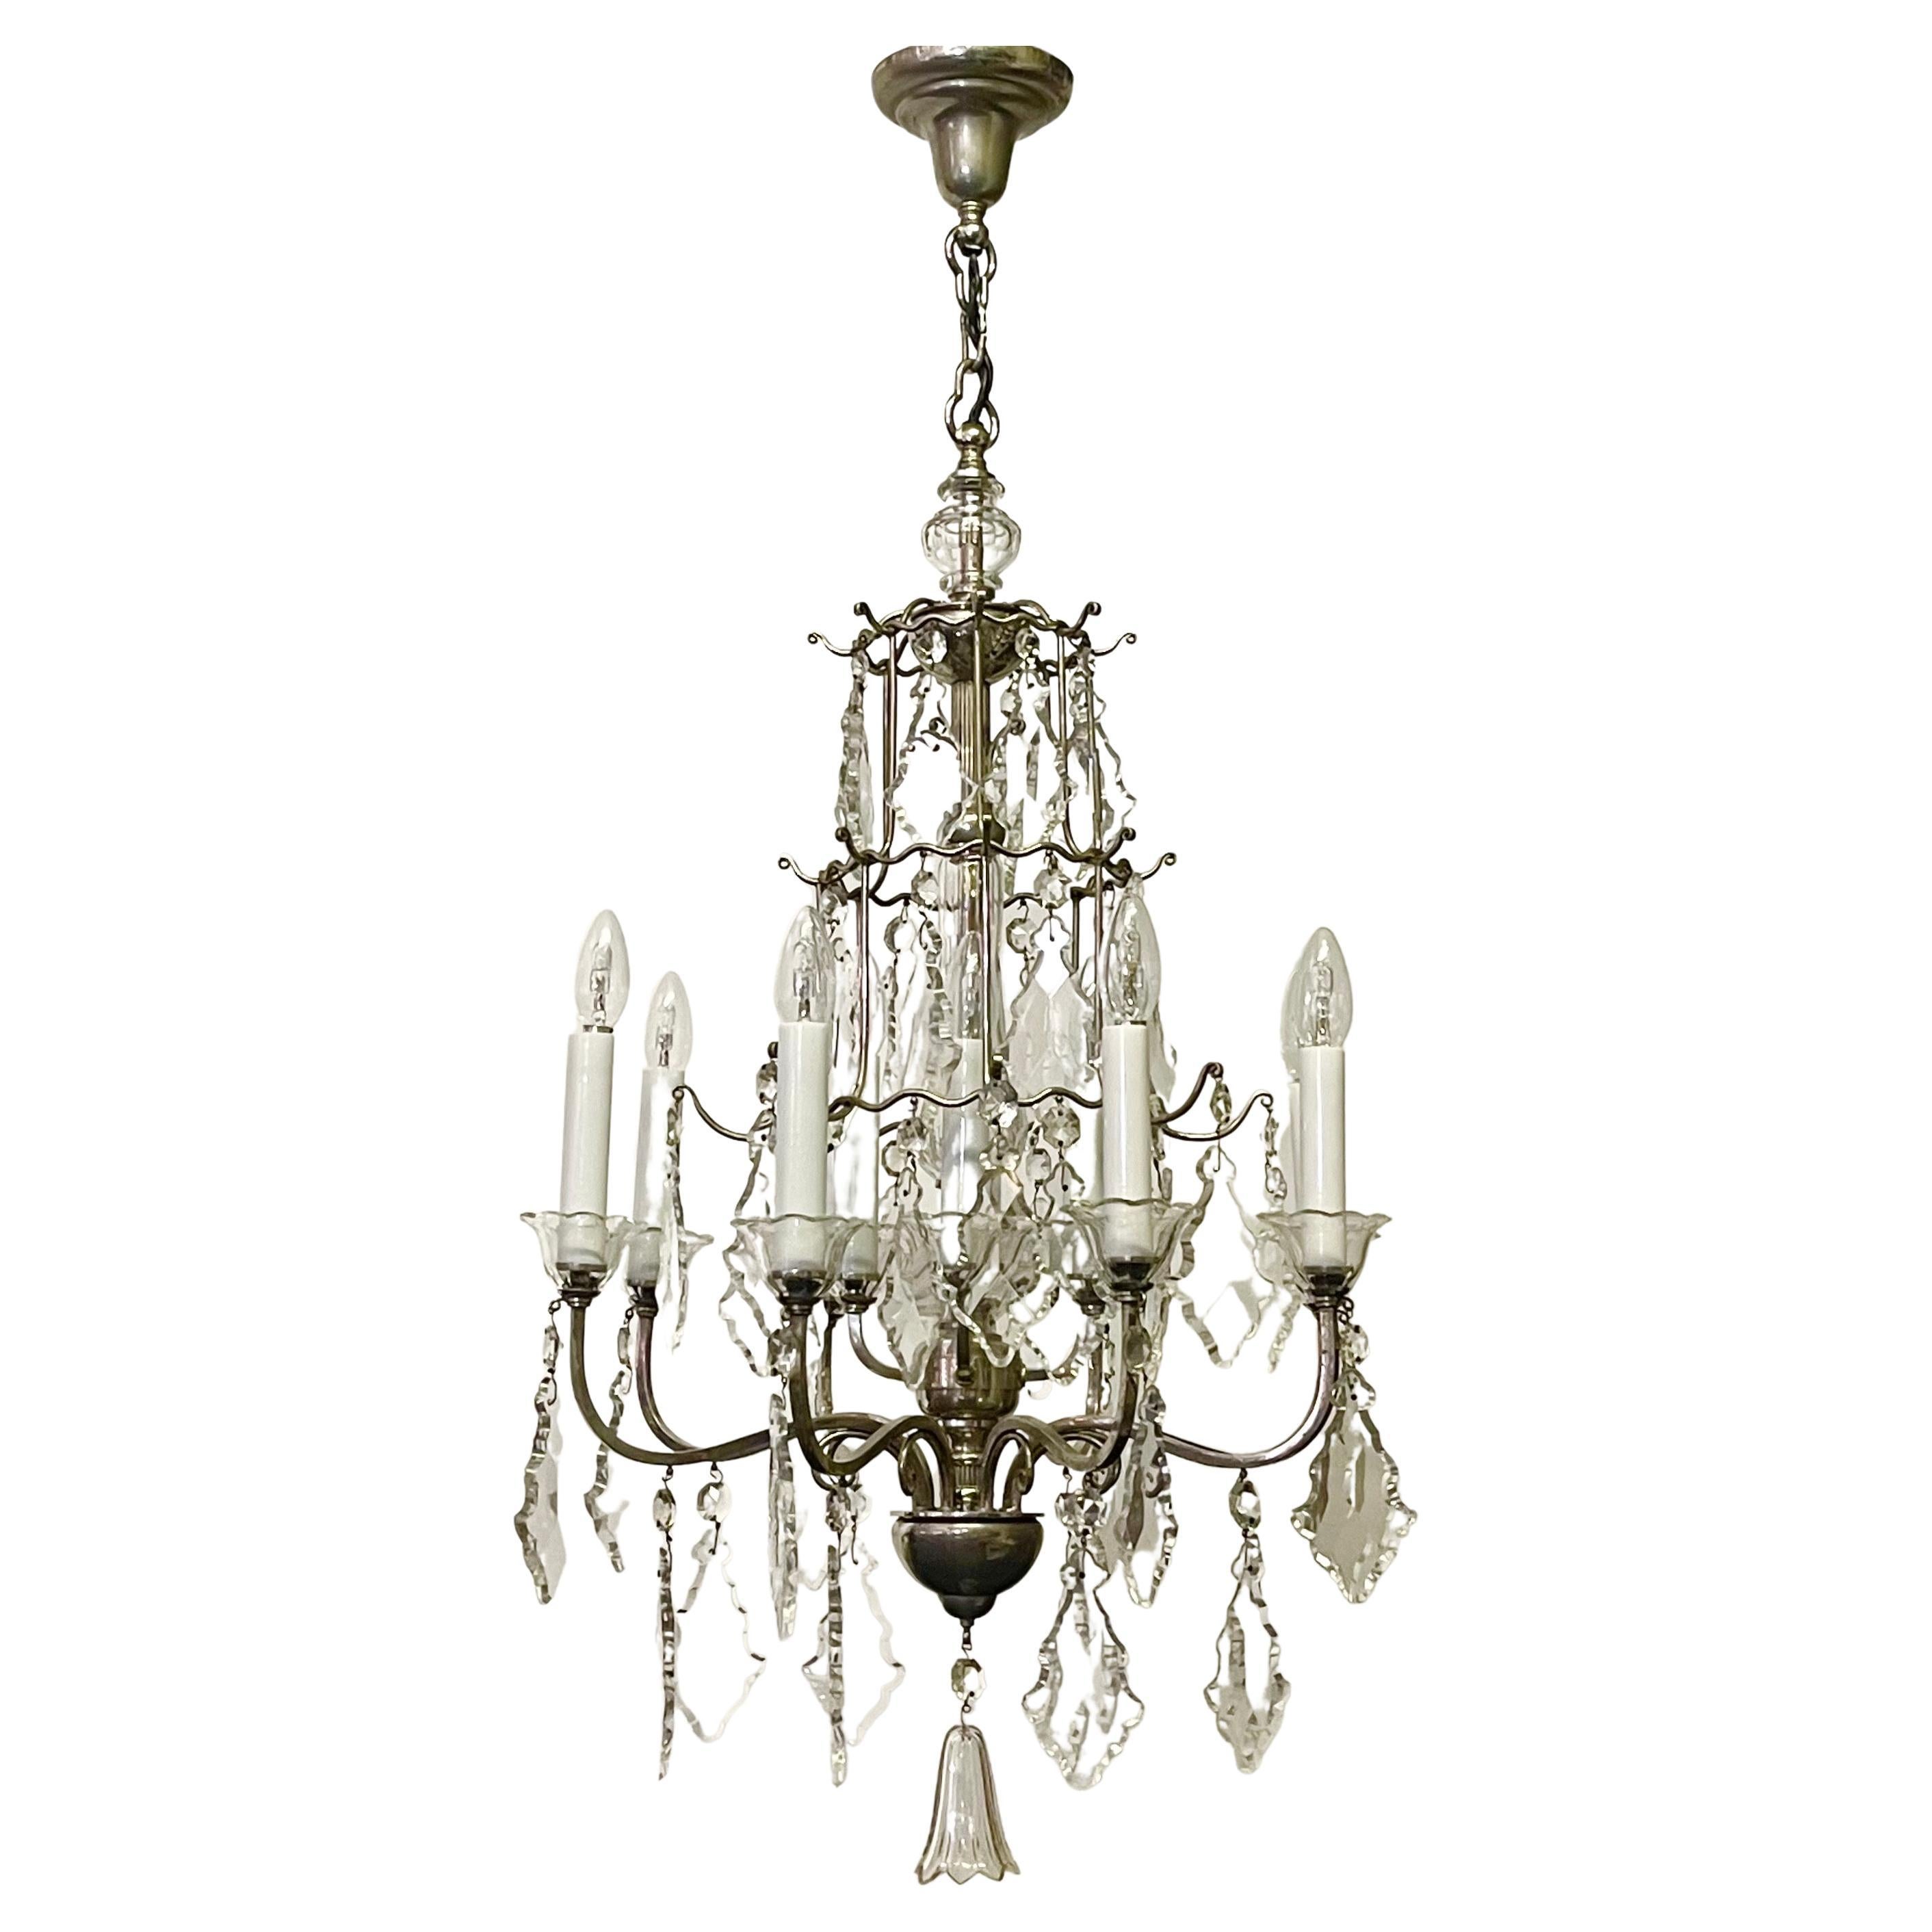 Silvered Bronze and Crystal Chandelier Attr. to Lobmeyr, circa 1920s For Sale